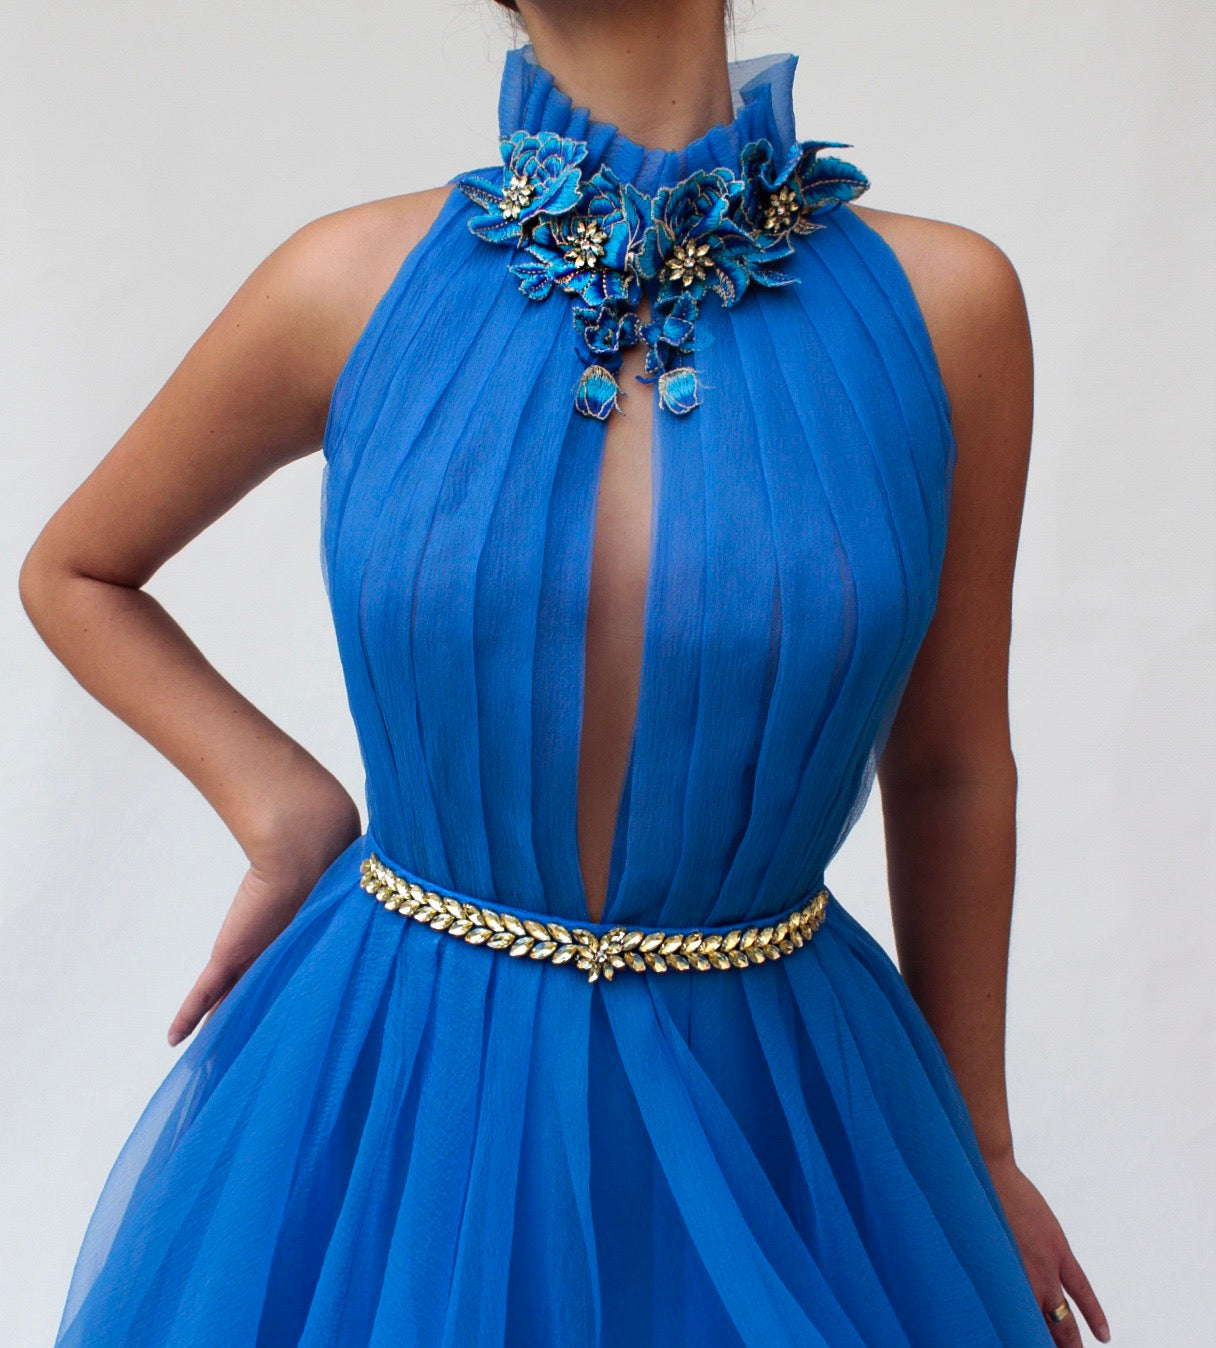 Blue A-Line dress with no sleeves and embroidery